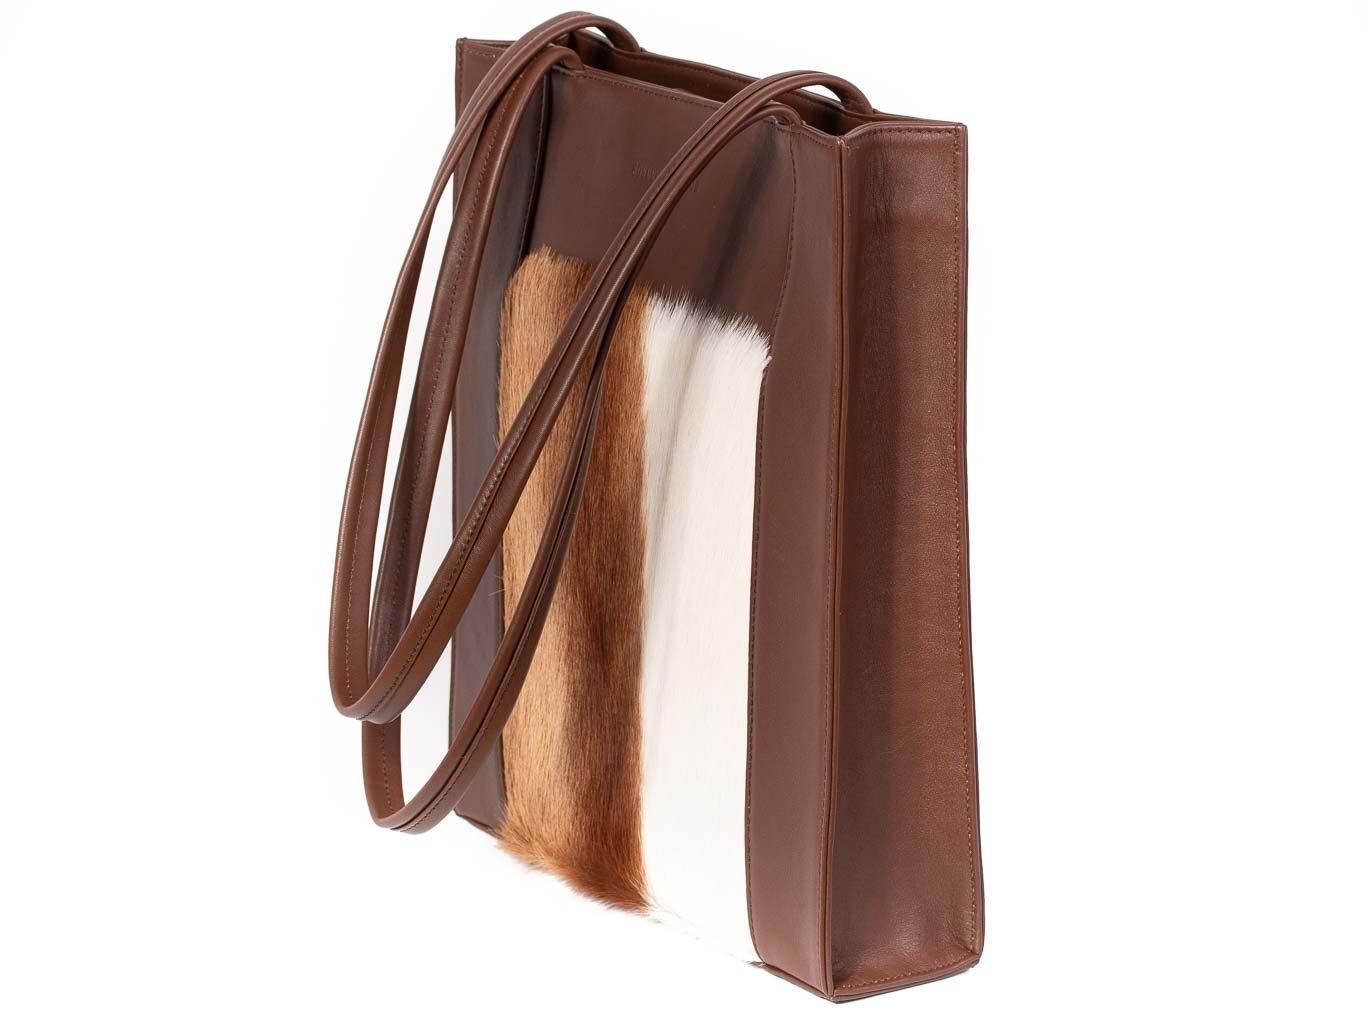 Tote Springbok Handbag in Cocoa Brown with a stripe feature by Sherene Melinda side angle strap